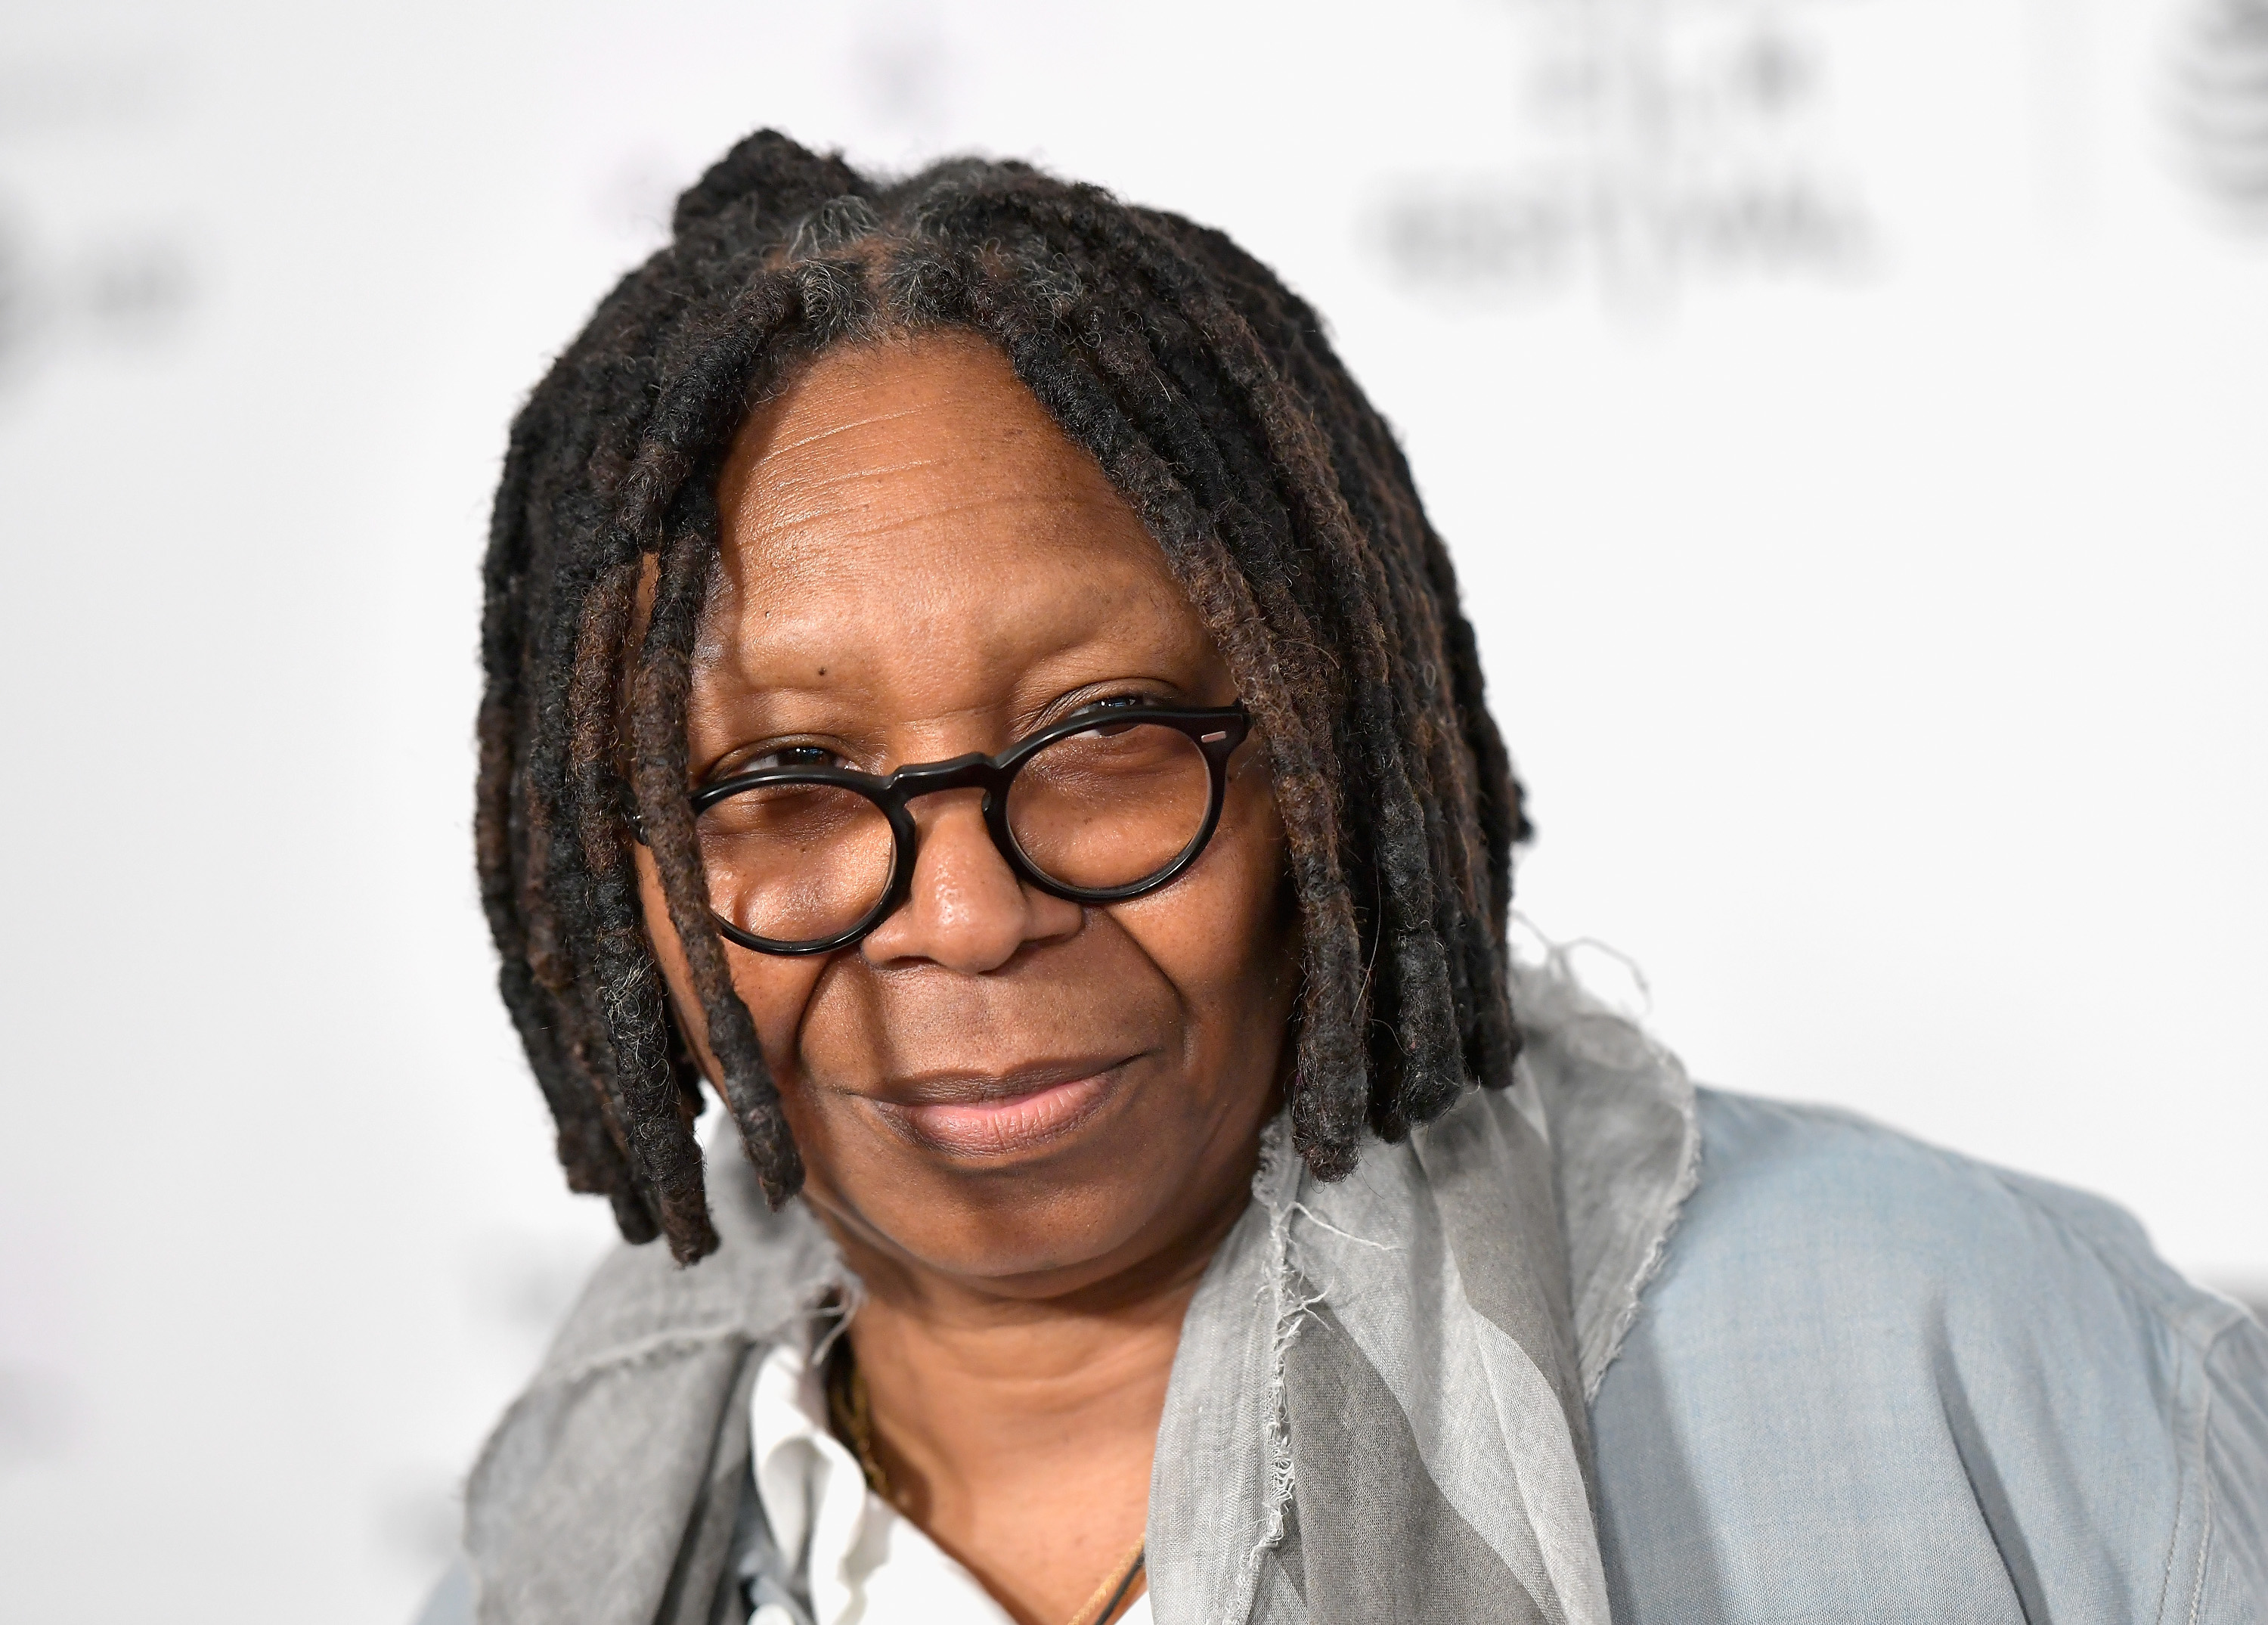 Whoopi Goldberg attends the Shorts Program: The History of White People in America during the 2018 Tribeca Film Festival at Regal Battery Park 11 on April 21, 2018 in New York City. | Source: Getty Images